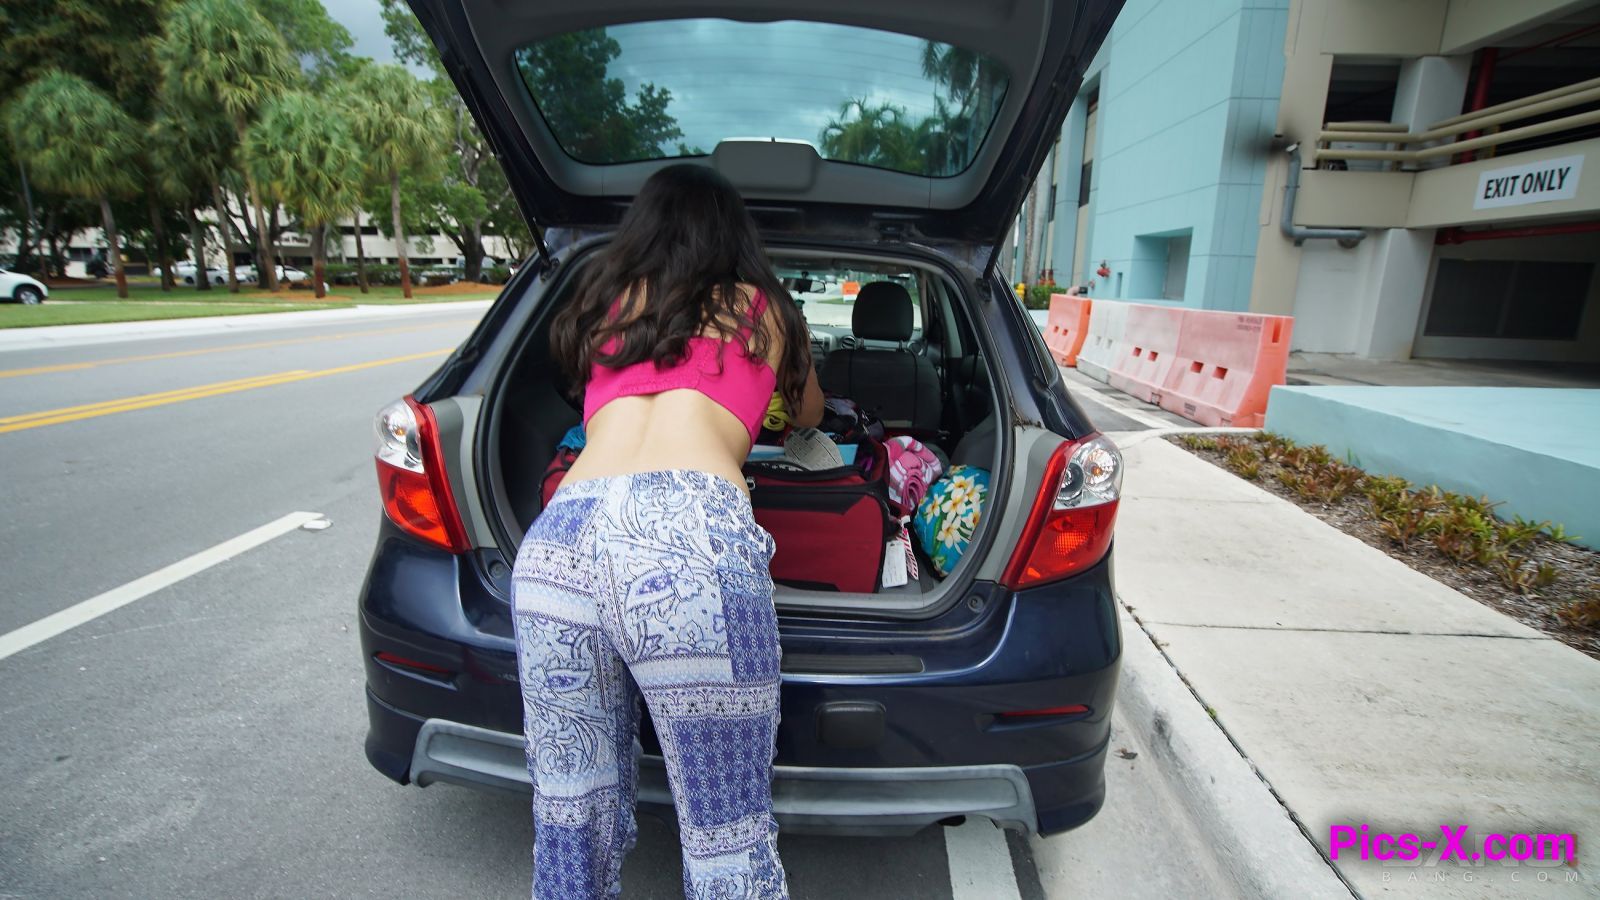 Xaya Lovelle is a hippie chick that will fuck to get her car fixed - Image 8